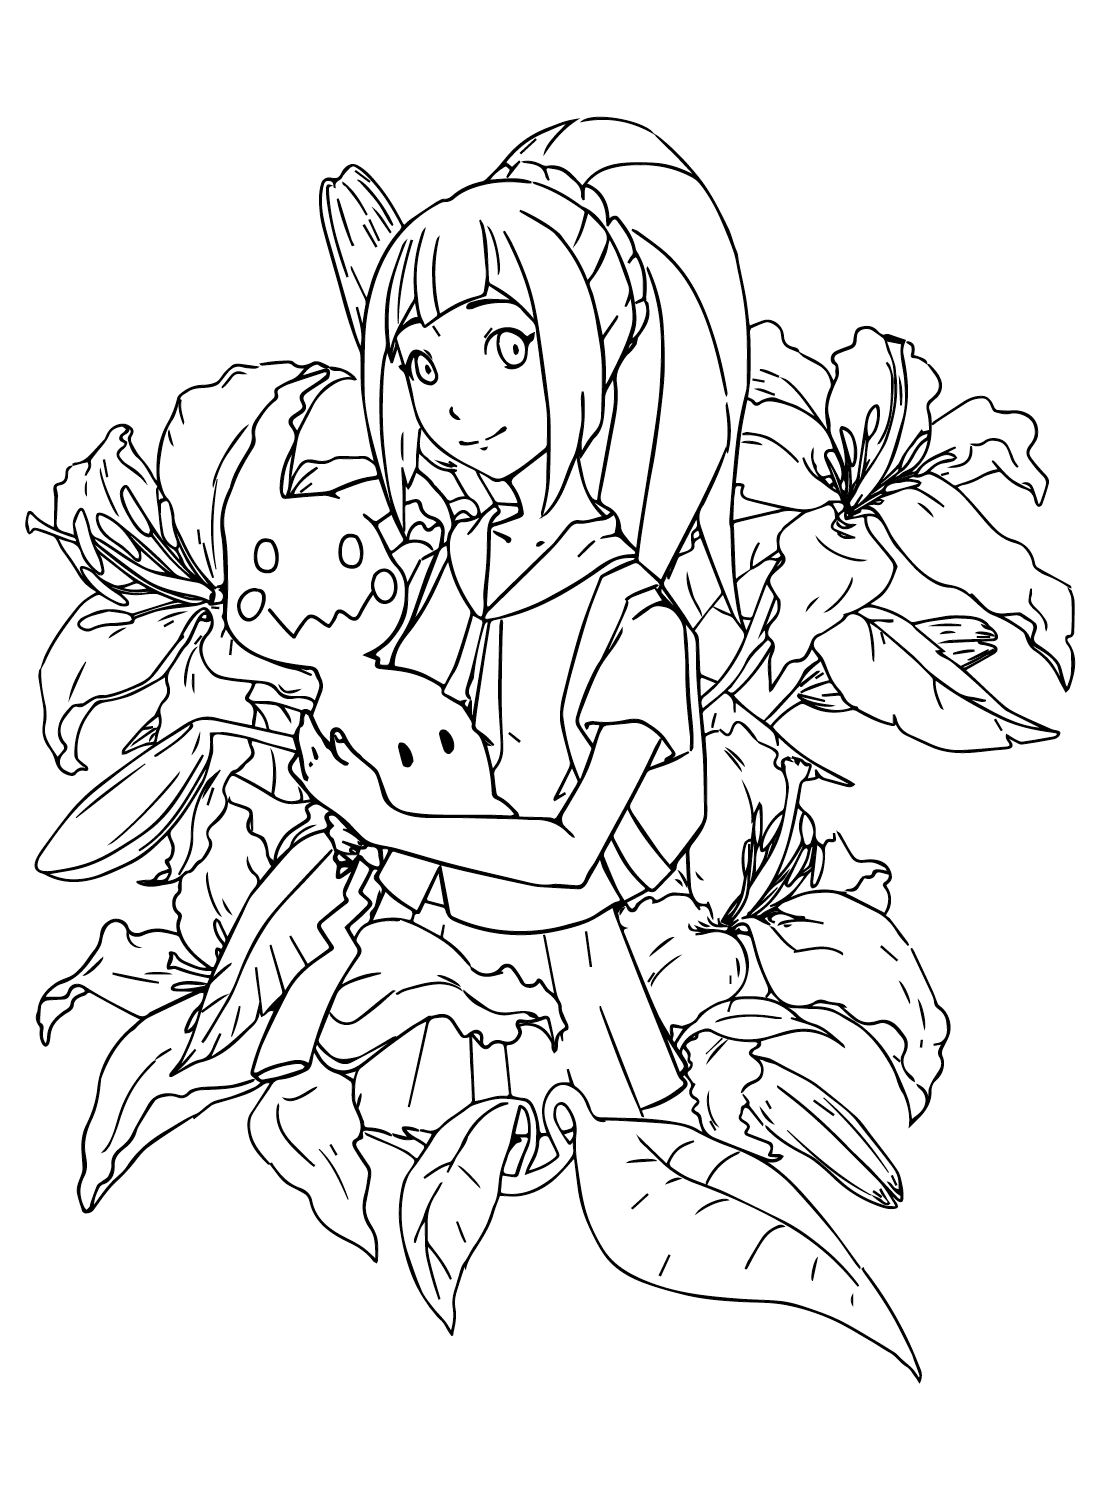 Lillie and Mimikyu Pokemon Coloring Page from Lillie Pokemon